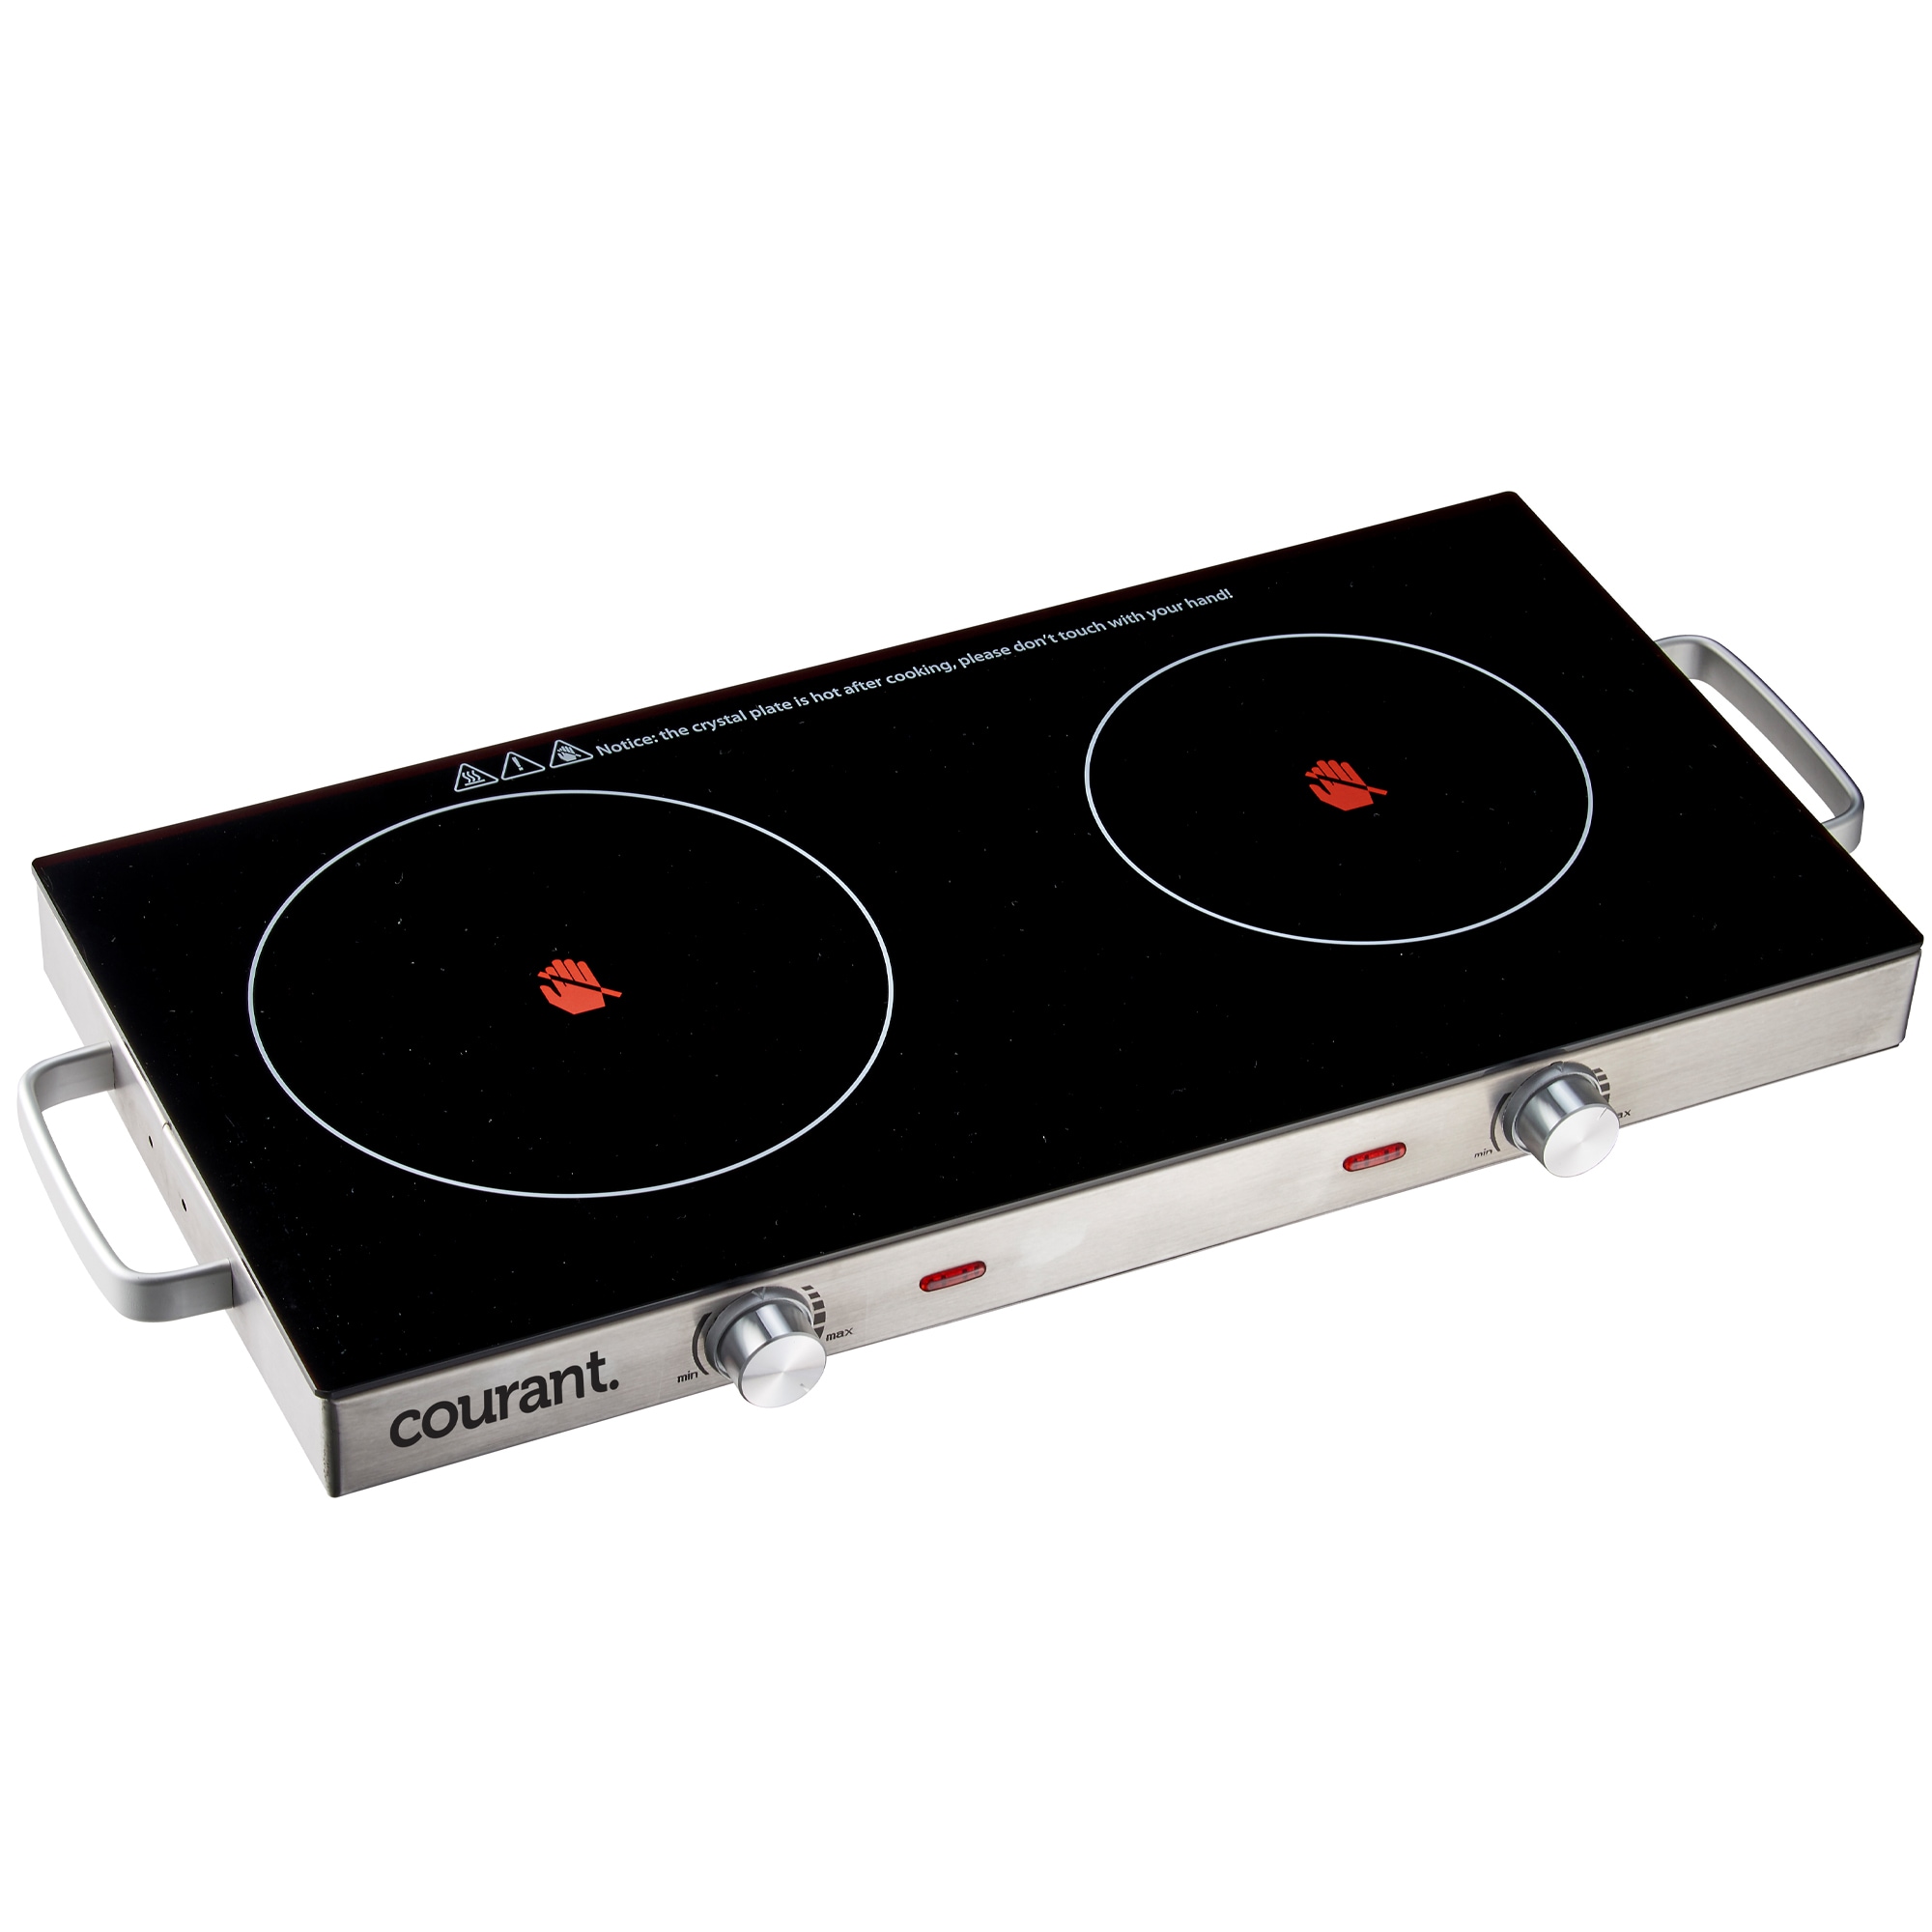 Cooktops at Lowe's